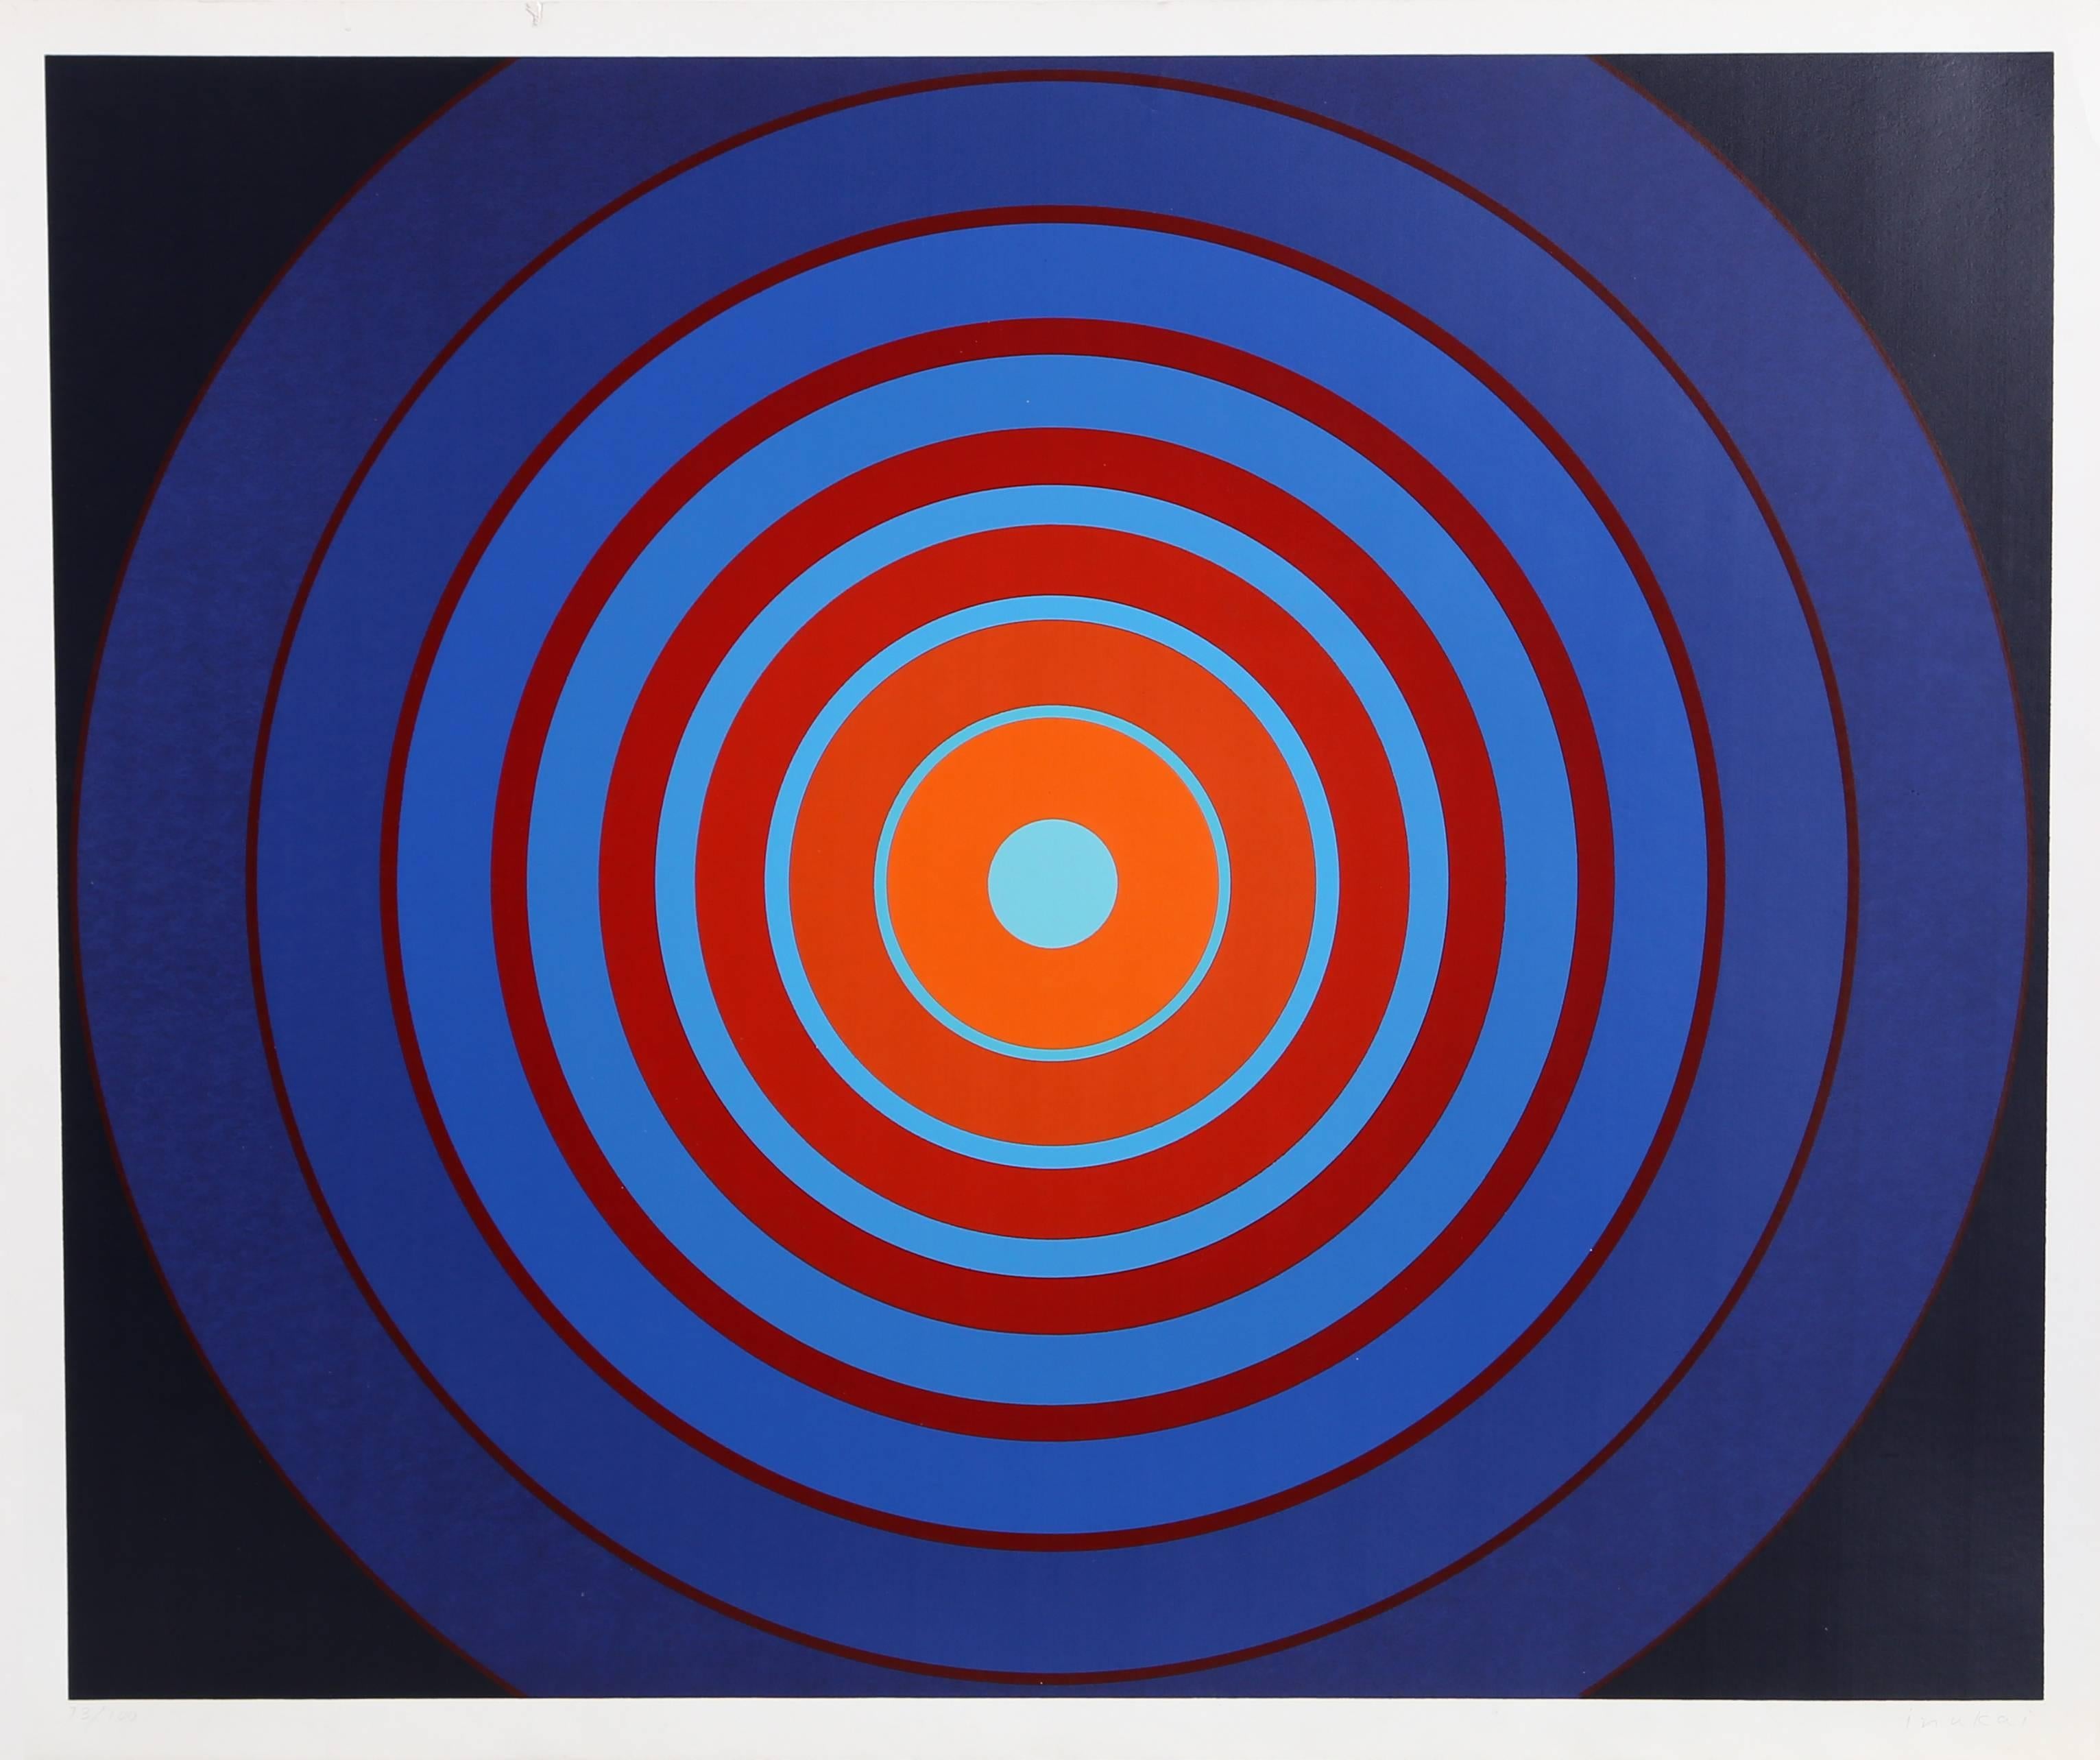 Artist: Kyohei Inukai, American (1913 - 1985)
Title: Untitled - Target I
Year: circa 1970
Medium: Silkscreen, signed and numbered in pencil
Edition: 100
Image Size: 21.5 x 26 inches
Size: 23 x 27.75 in. (58.42 x 70.49 cm)